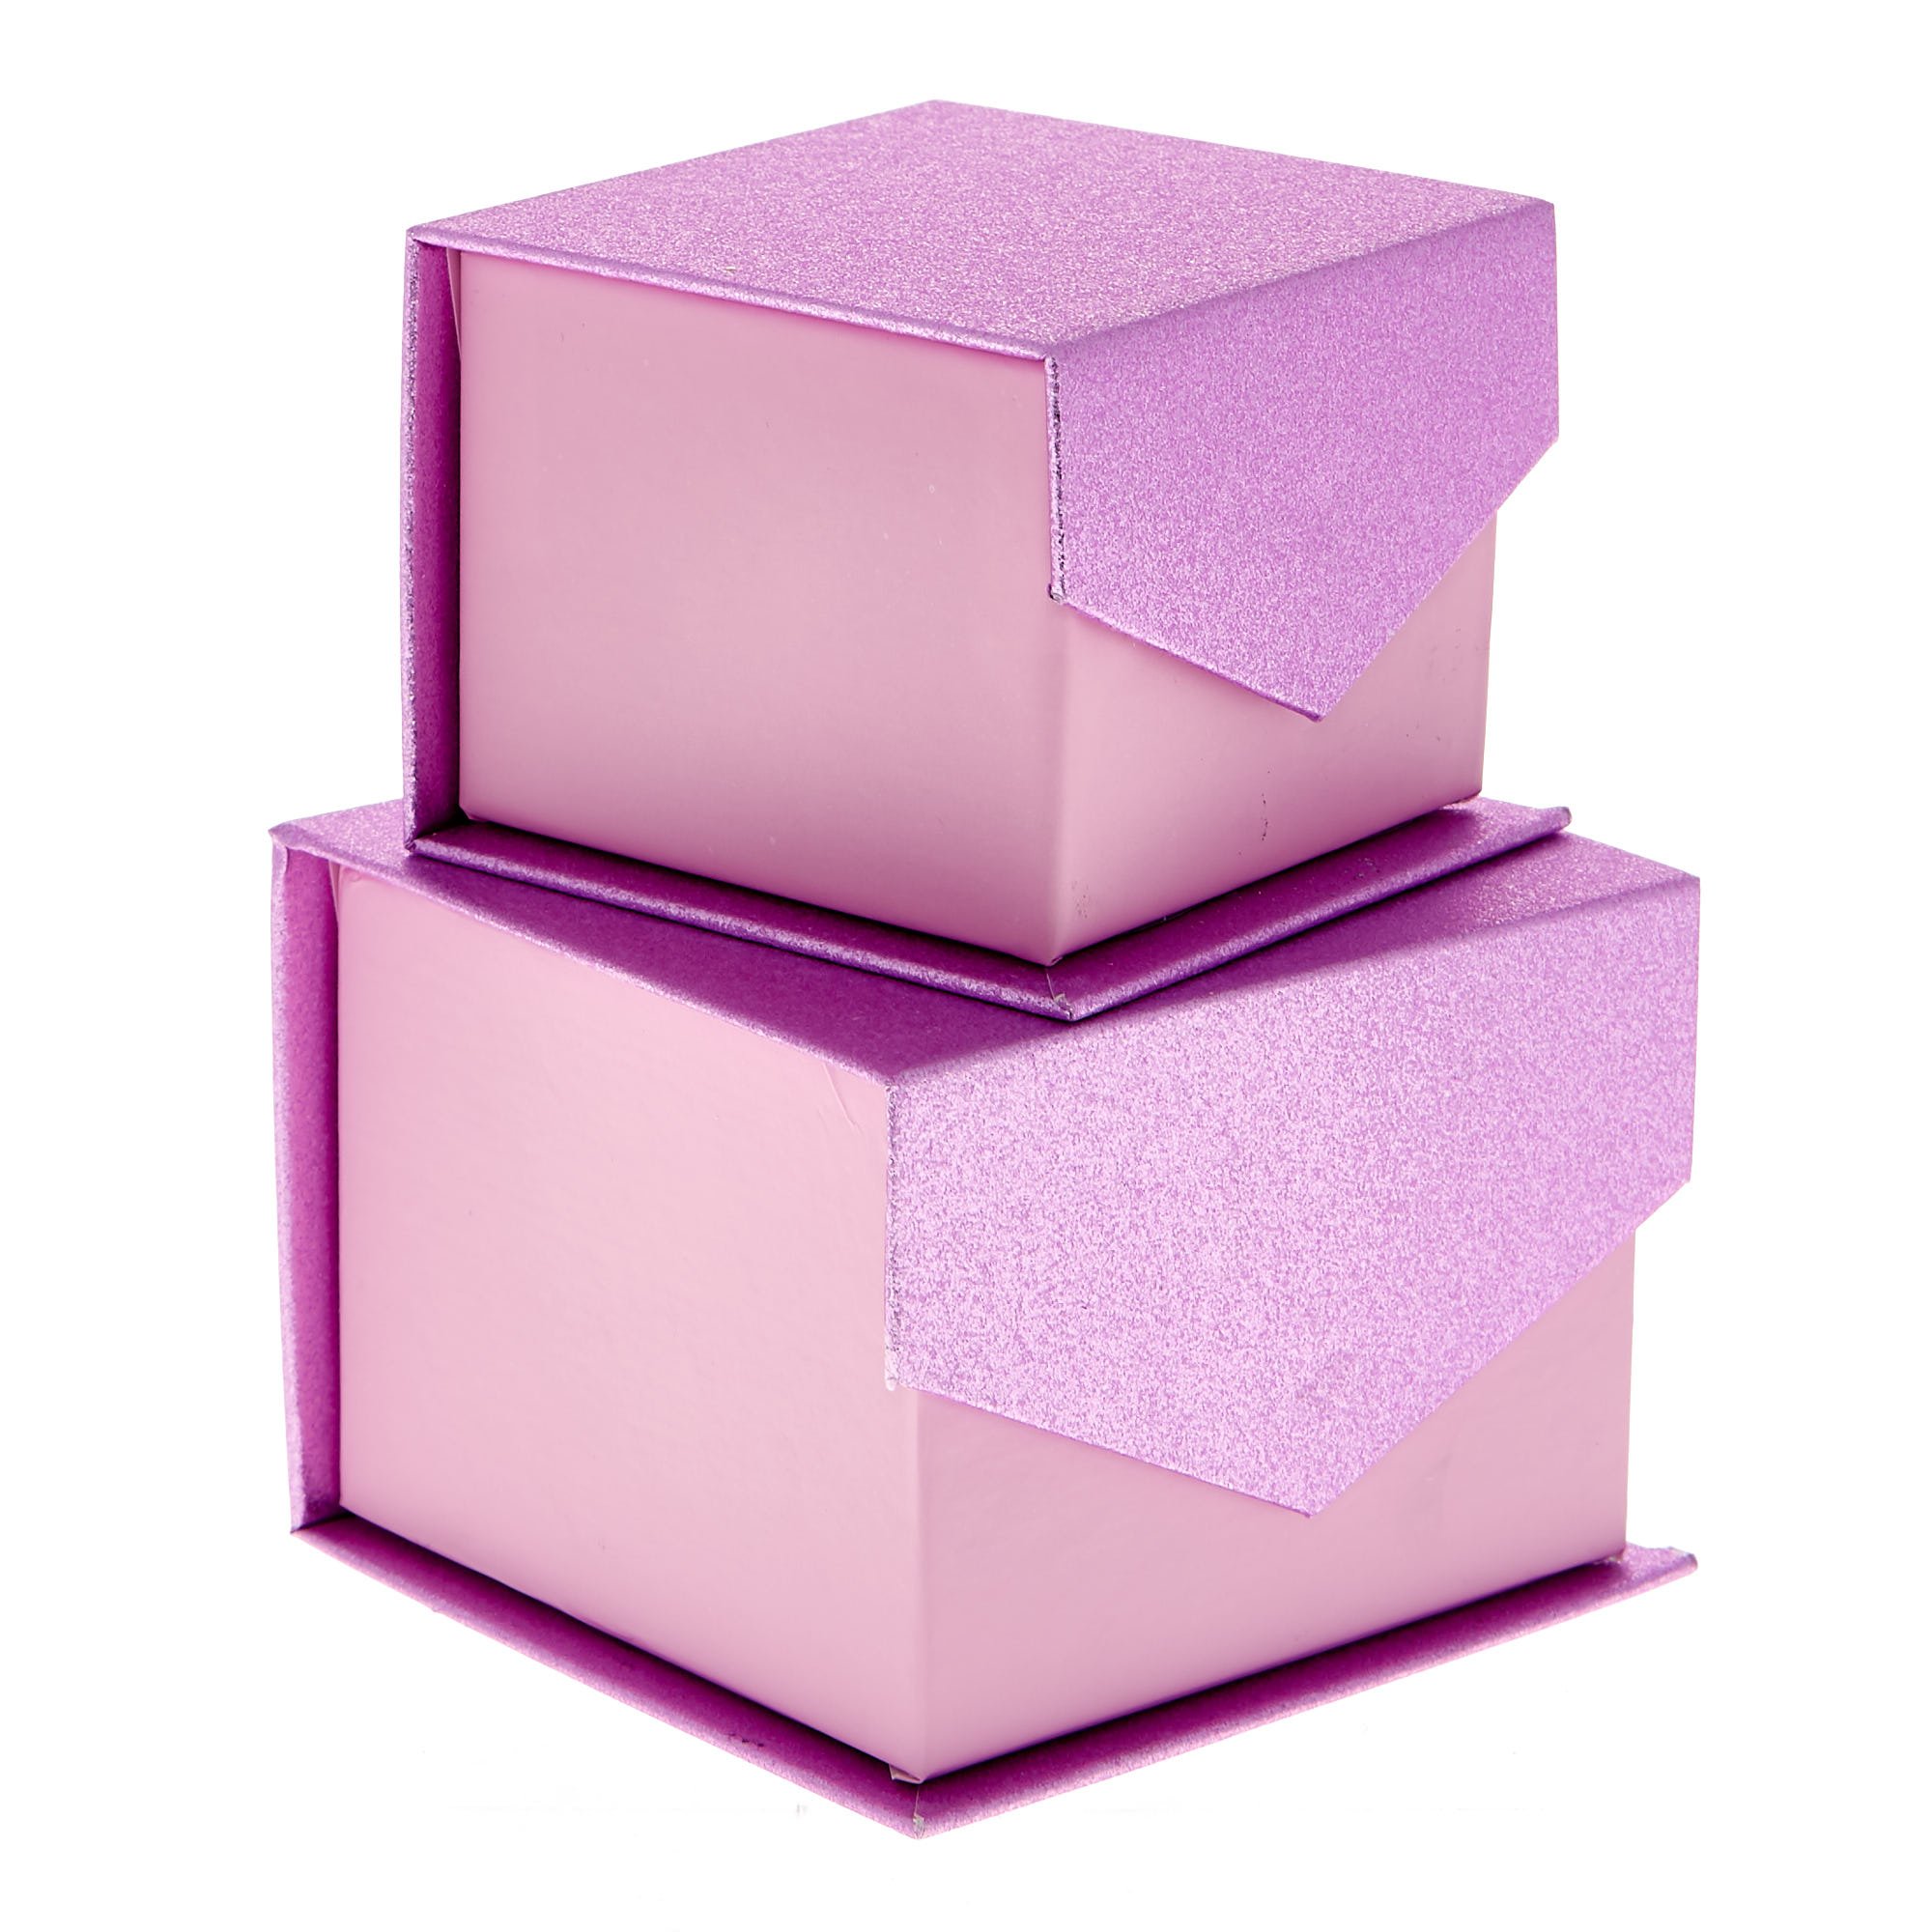 Shimmering Pink Jewellery Boxes - Set of 2